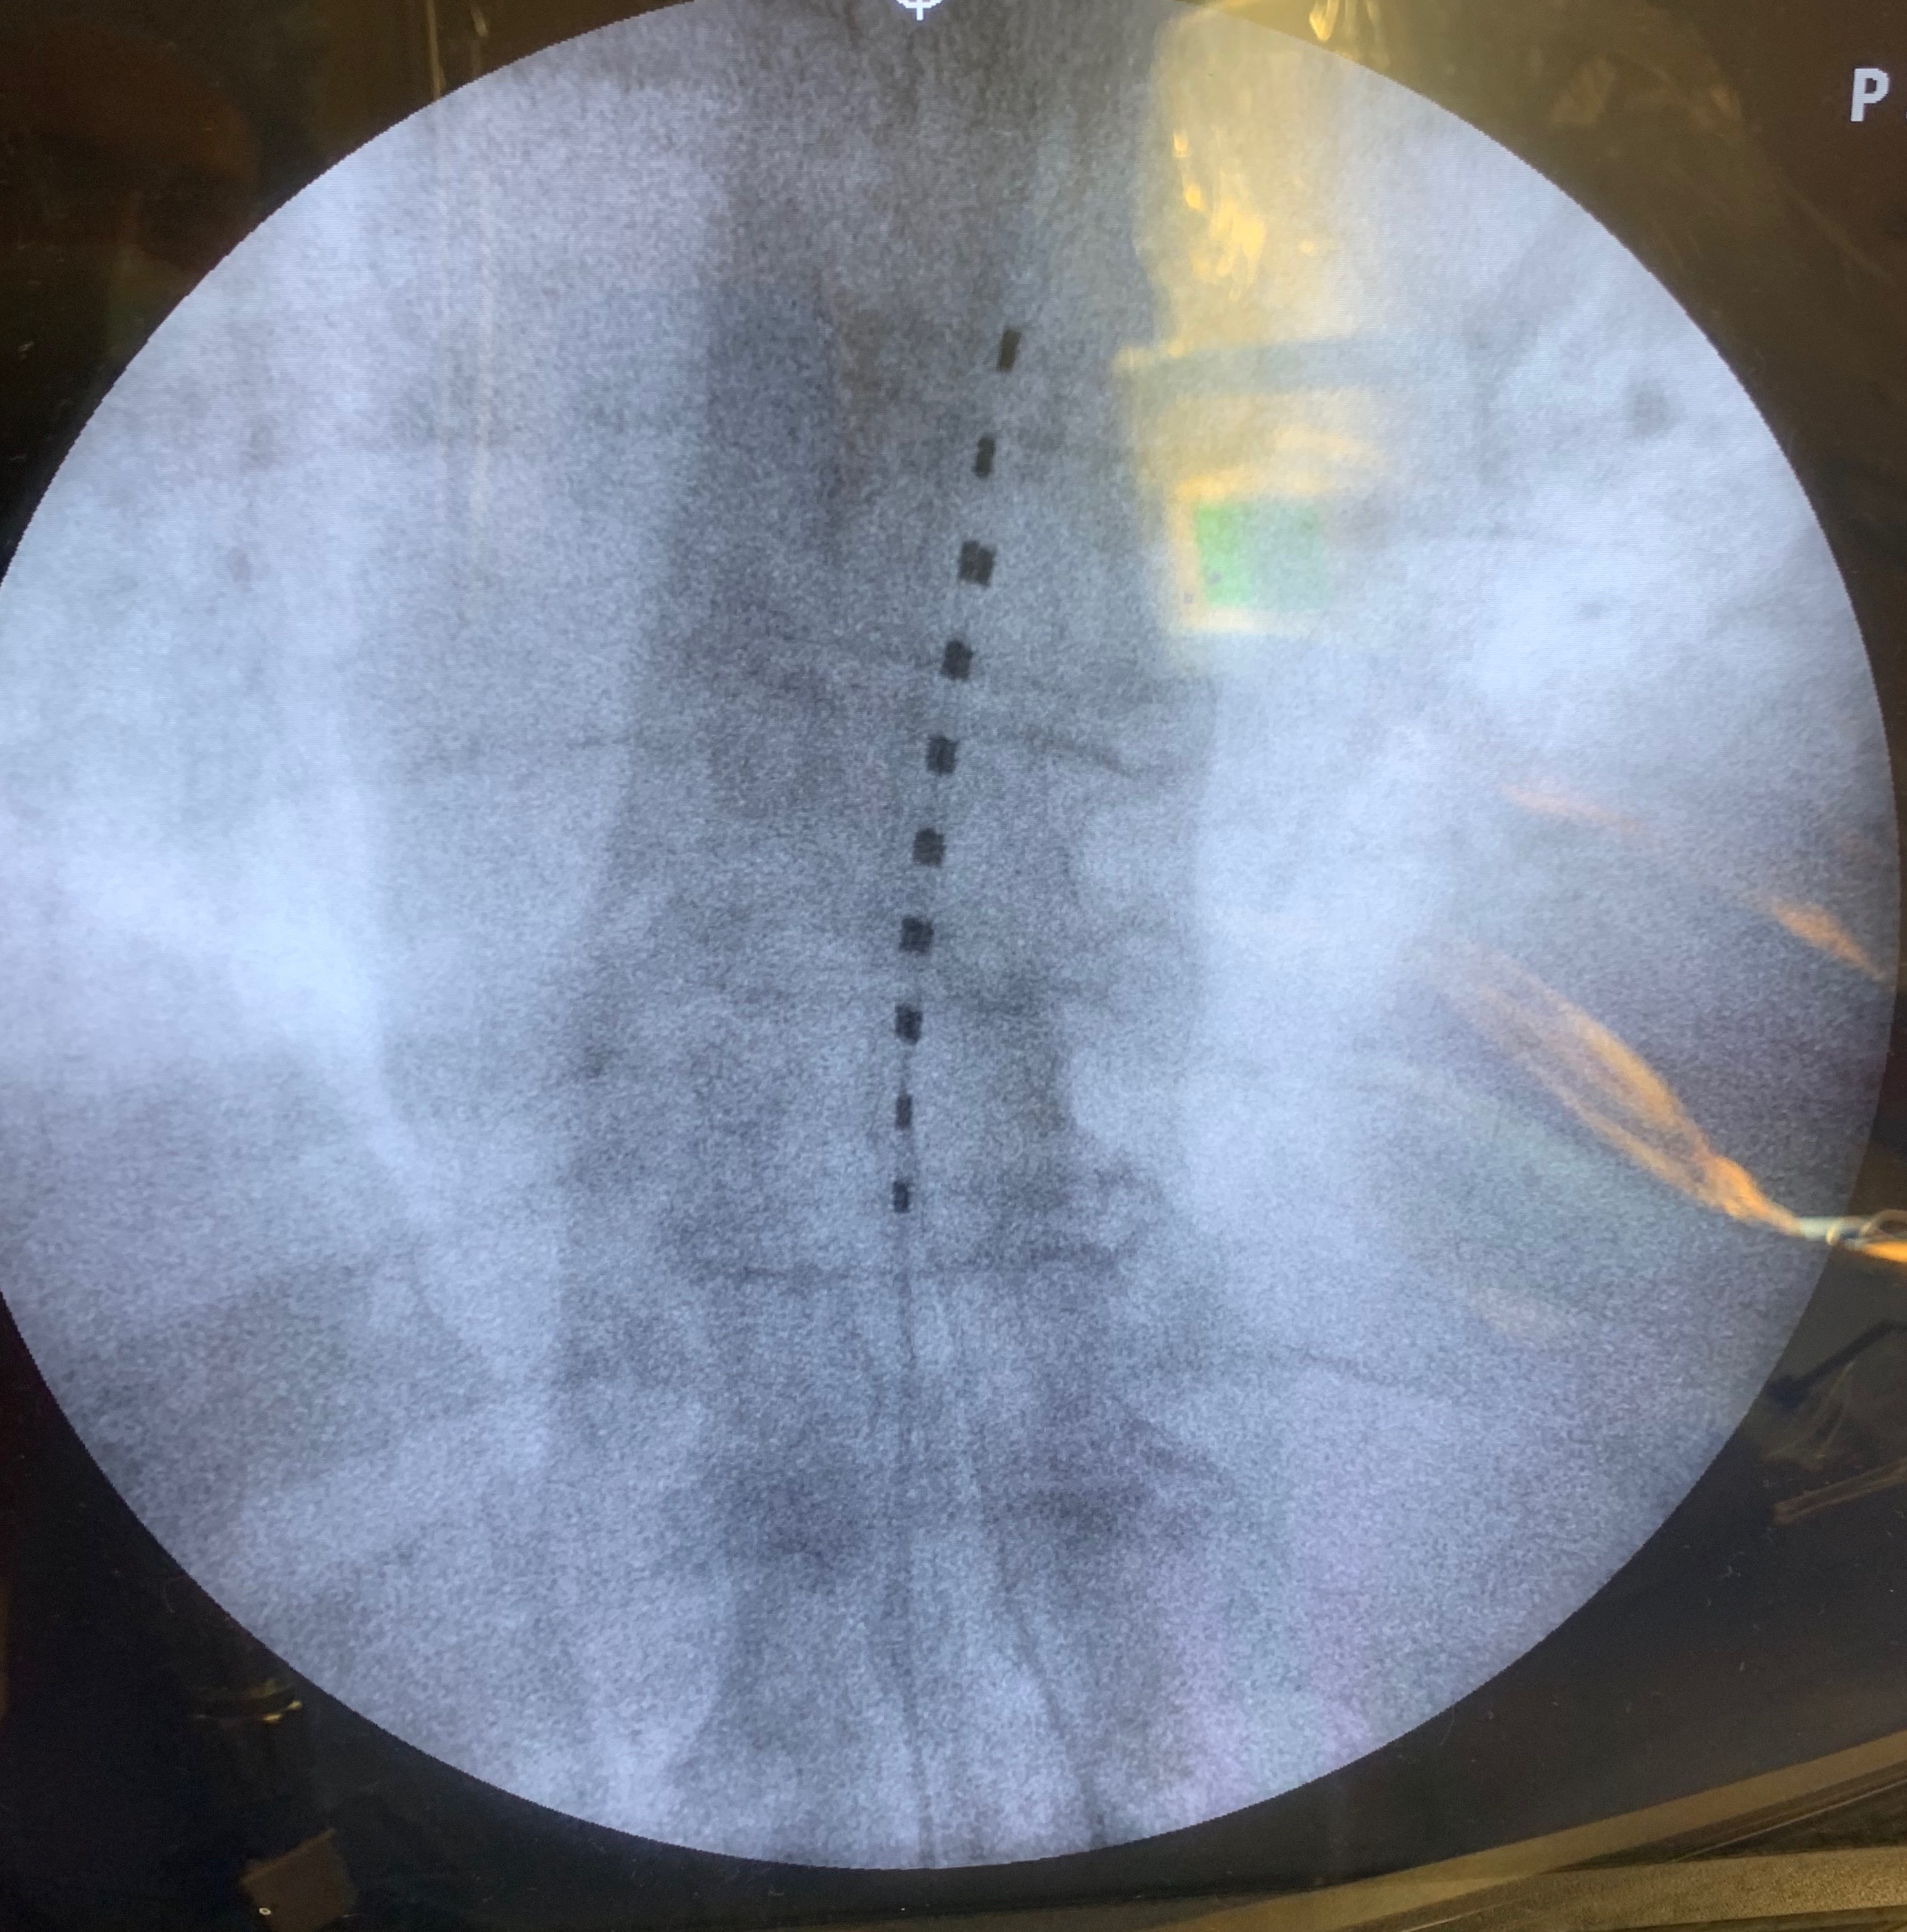 spinal cord stimulator implant pictures